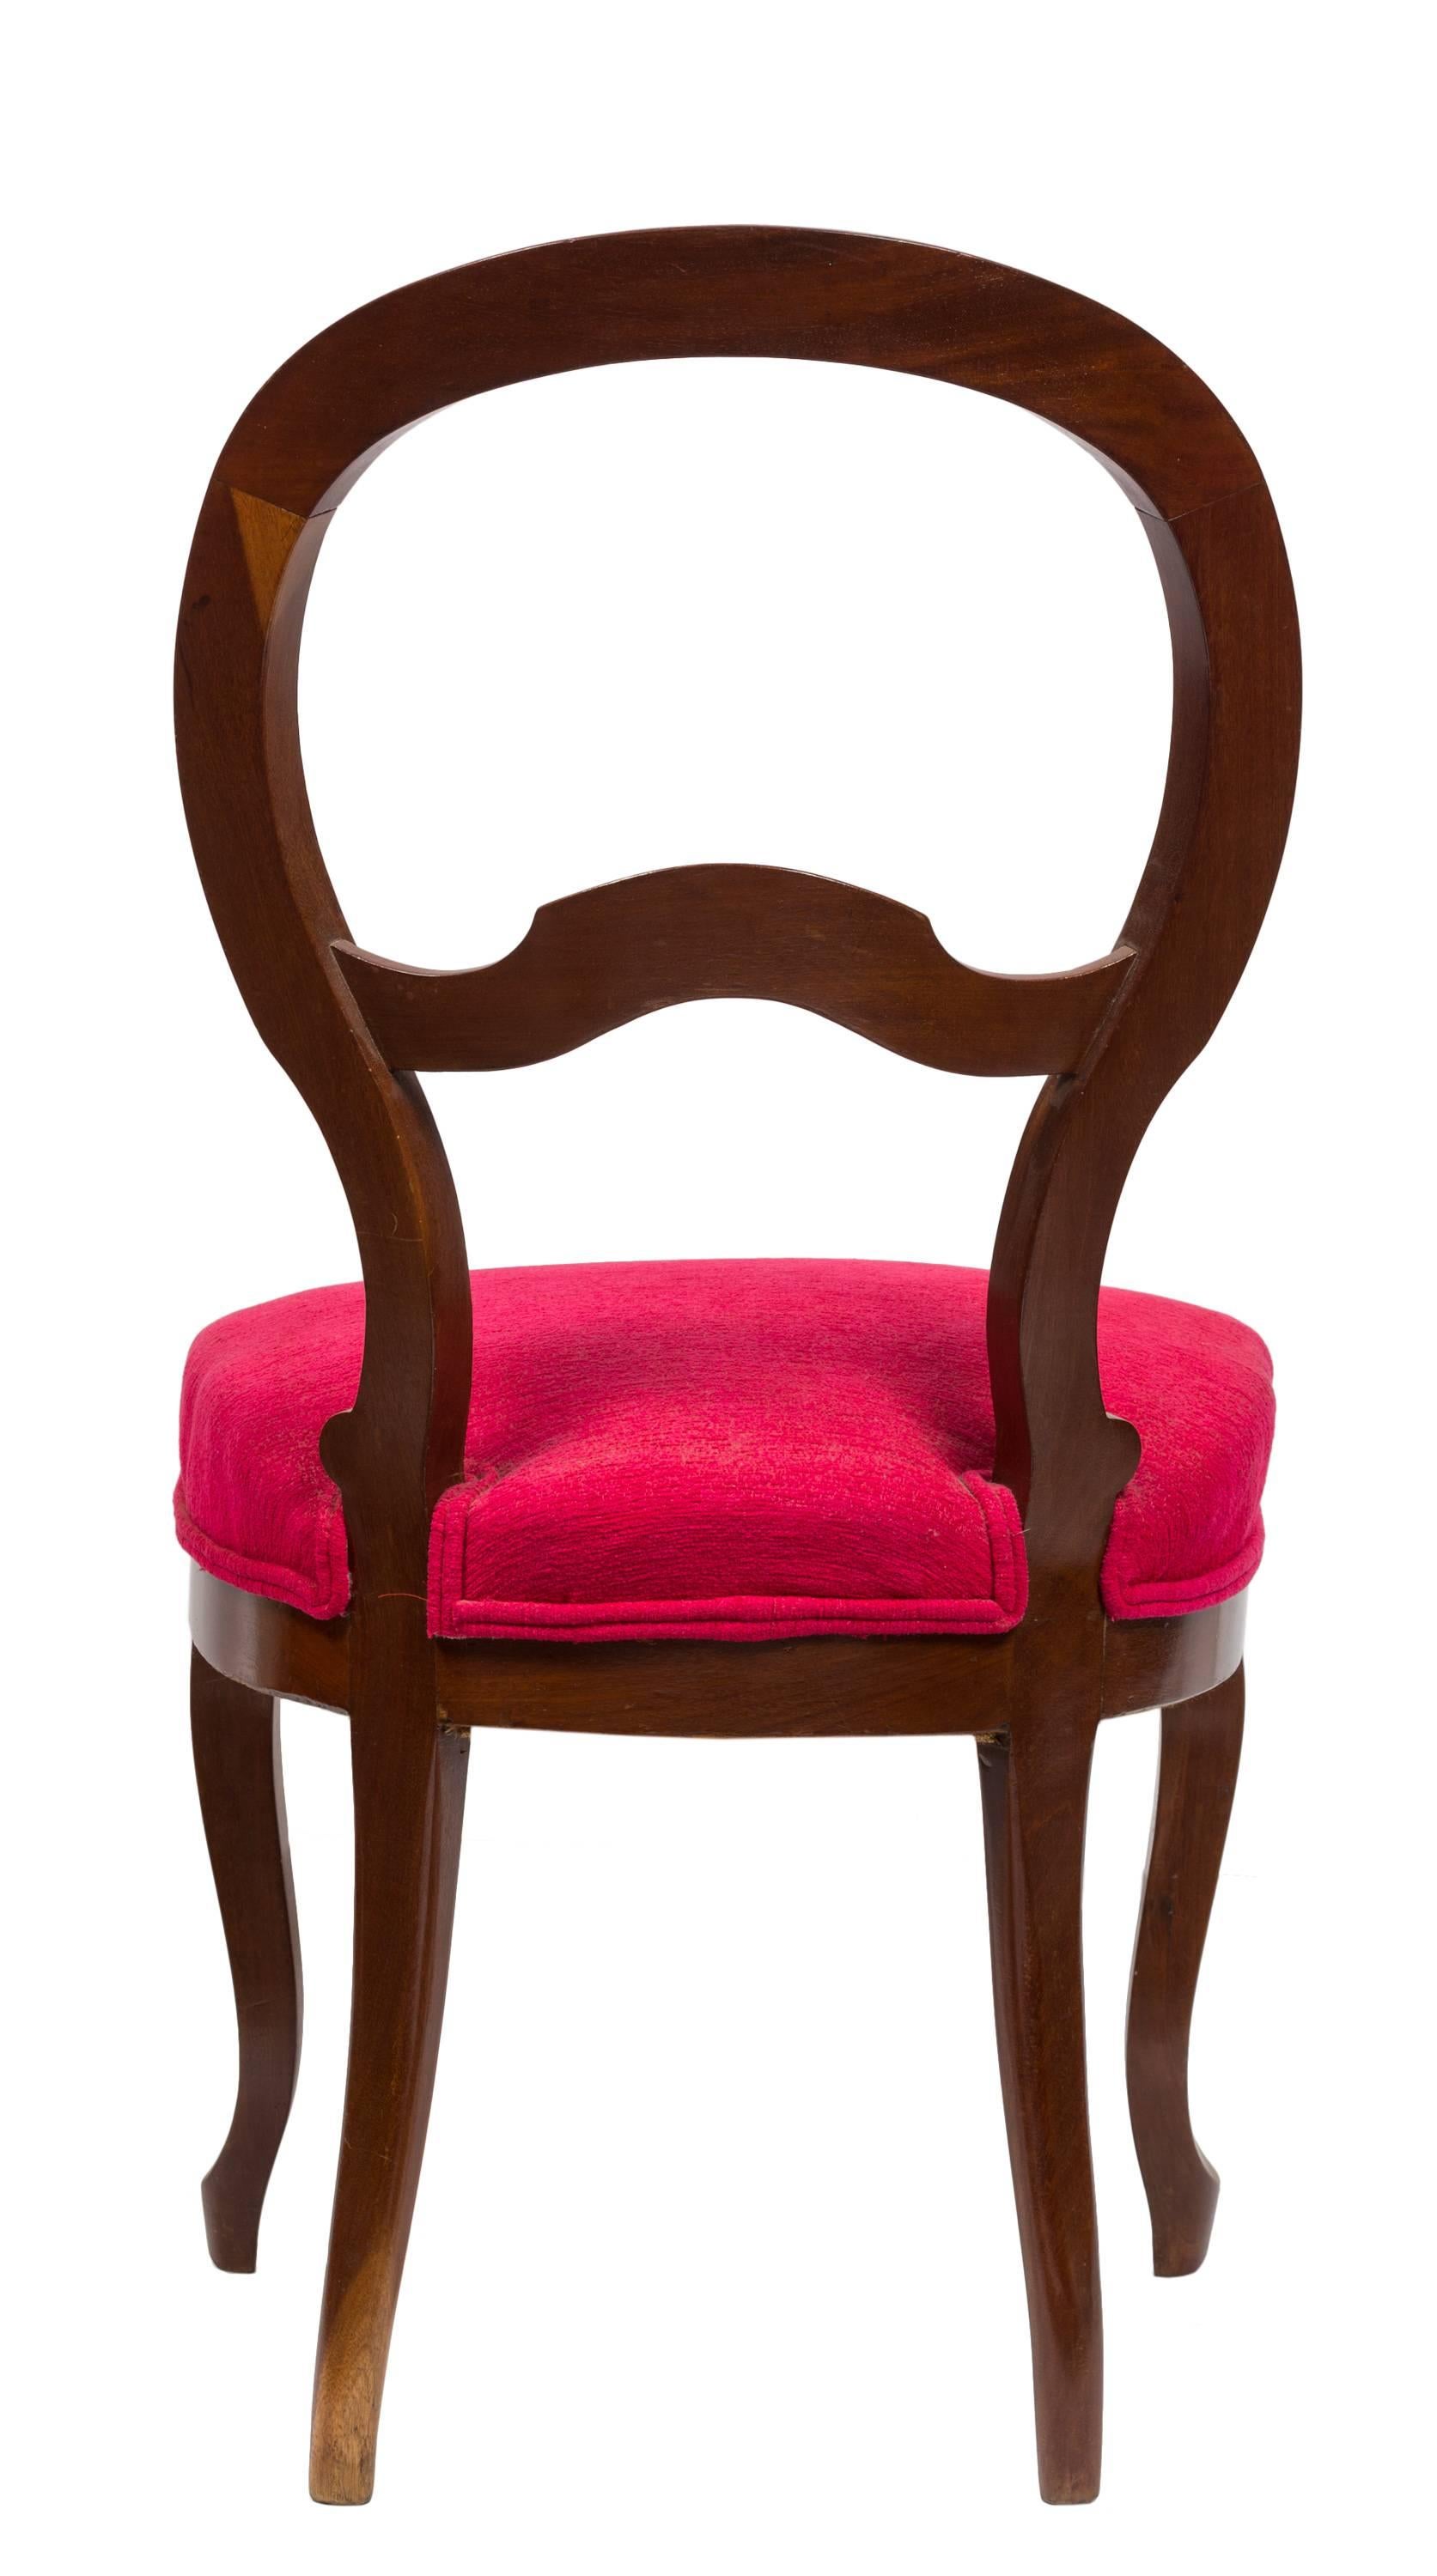 Pair of Unmatched 19th Century Walnut and Magenta Red Fabric Spanish Chairs 3